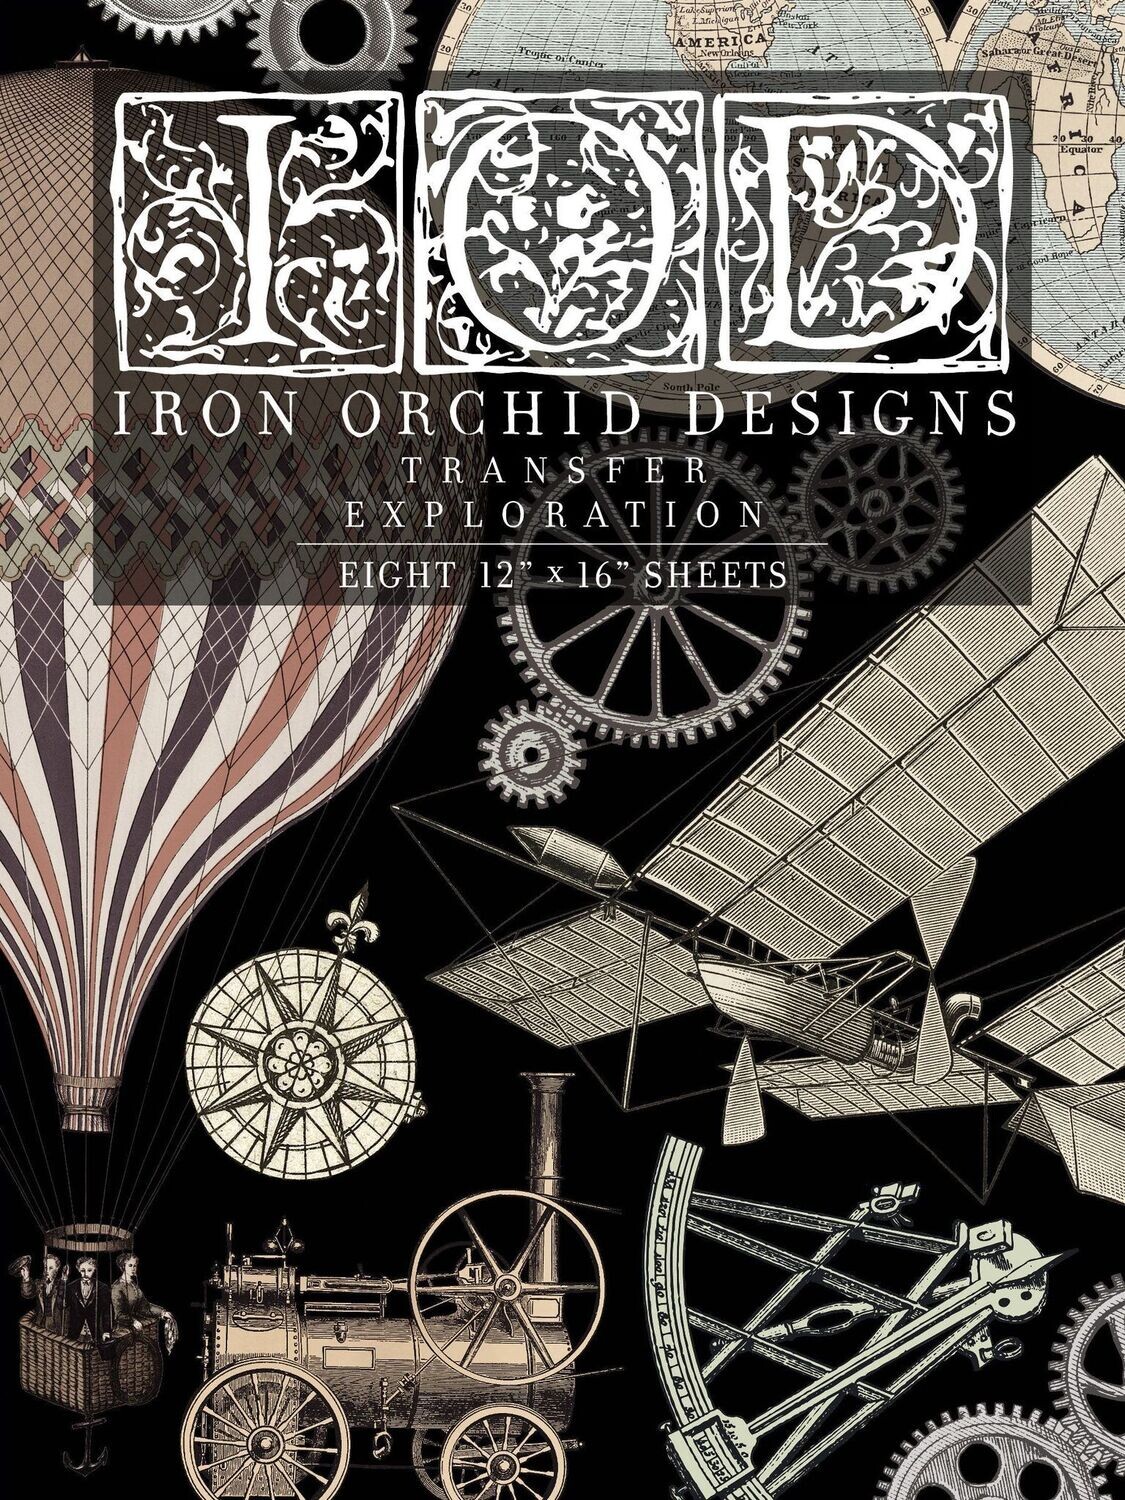 EXPLORATION TRANSFER by IOD - Iron Orchid Designs